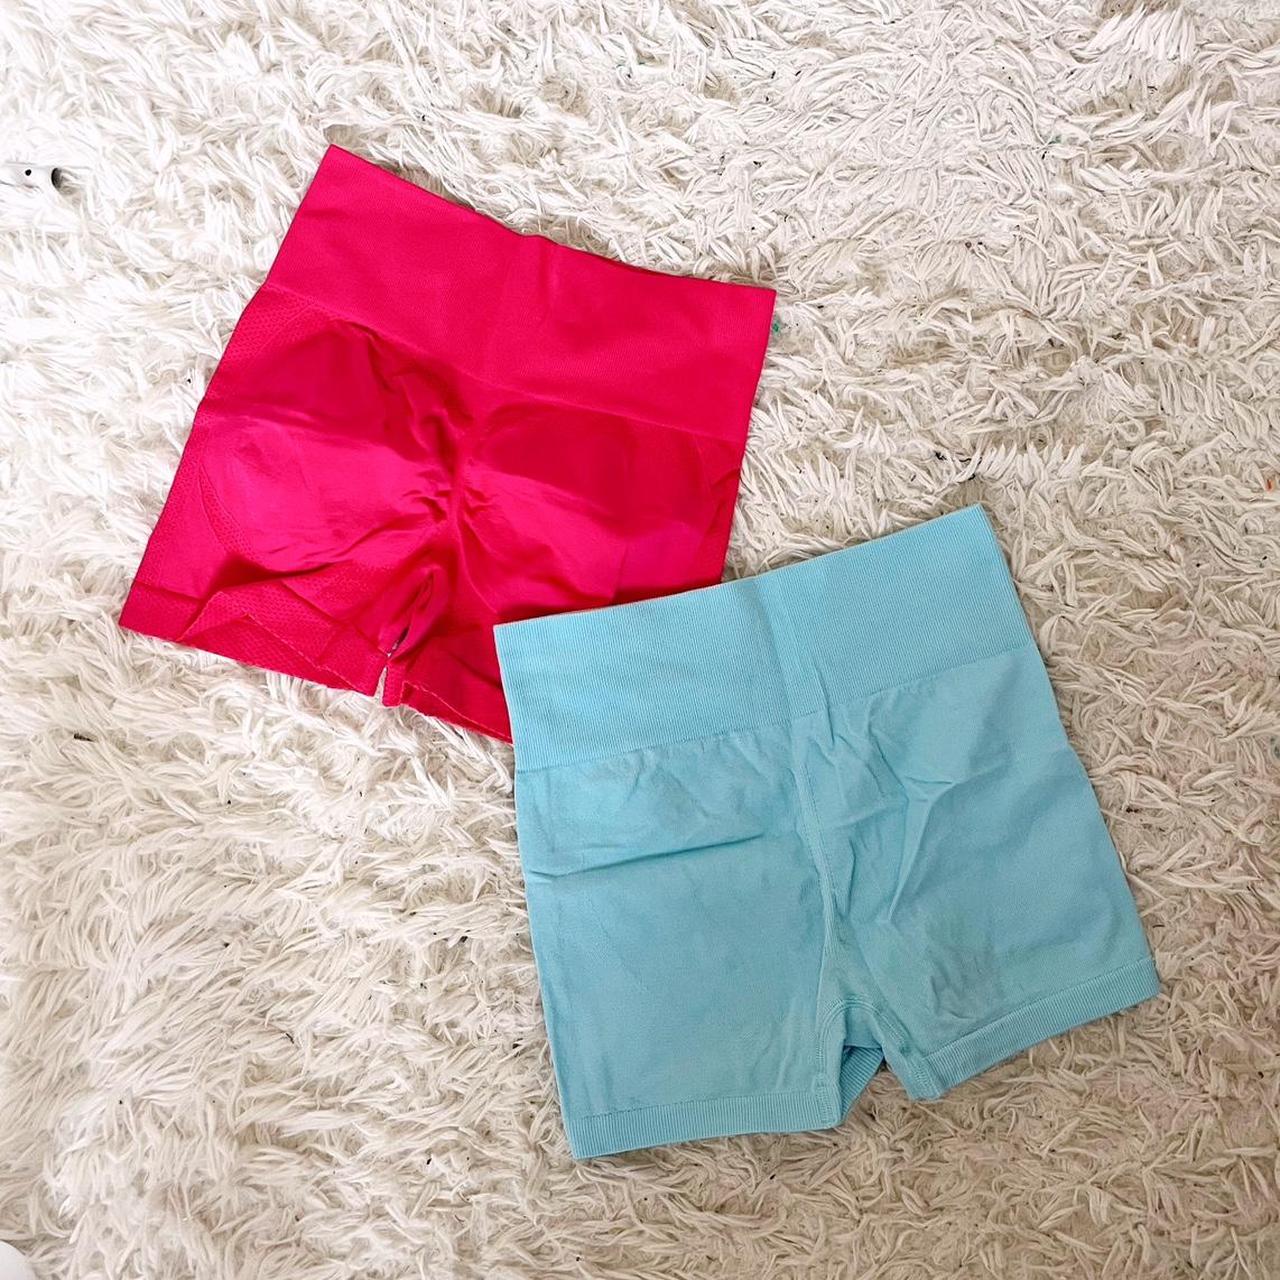 Extreme Fit Women's Pink and Blue Shorts